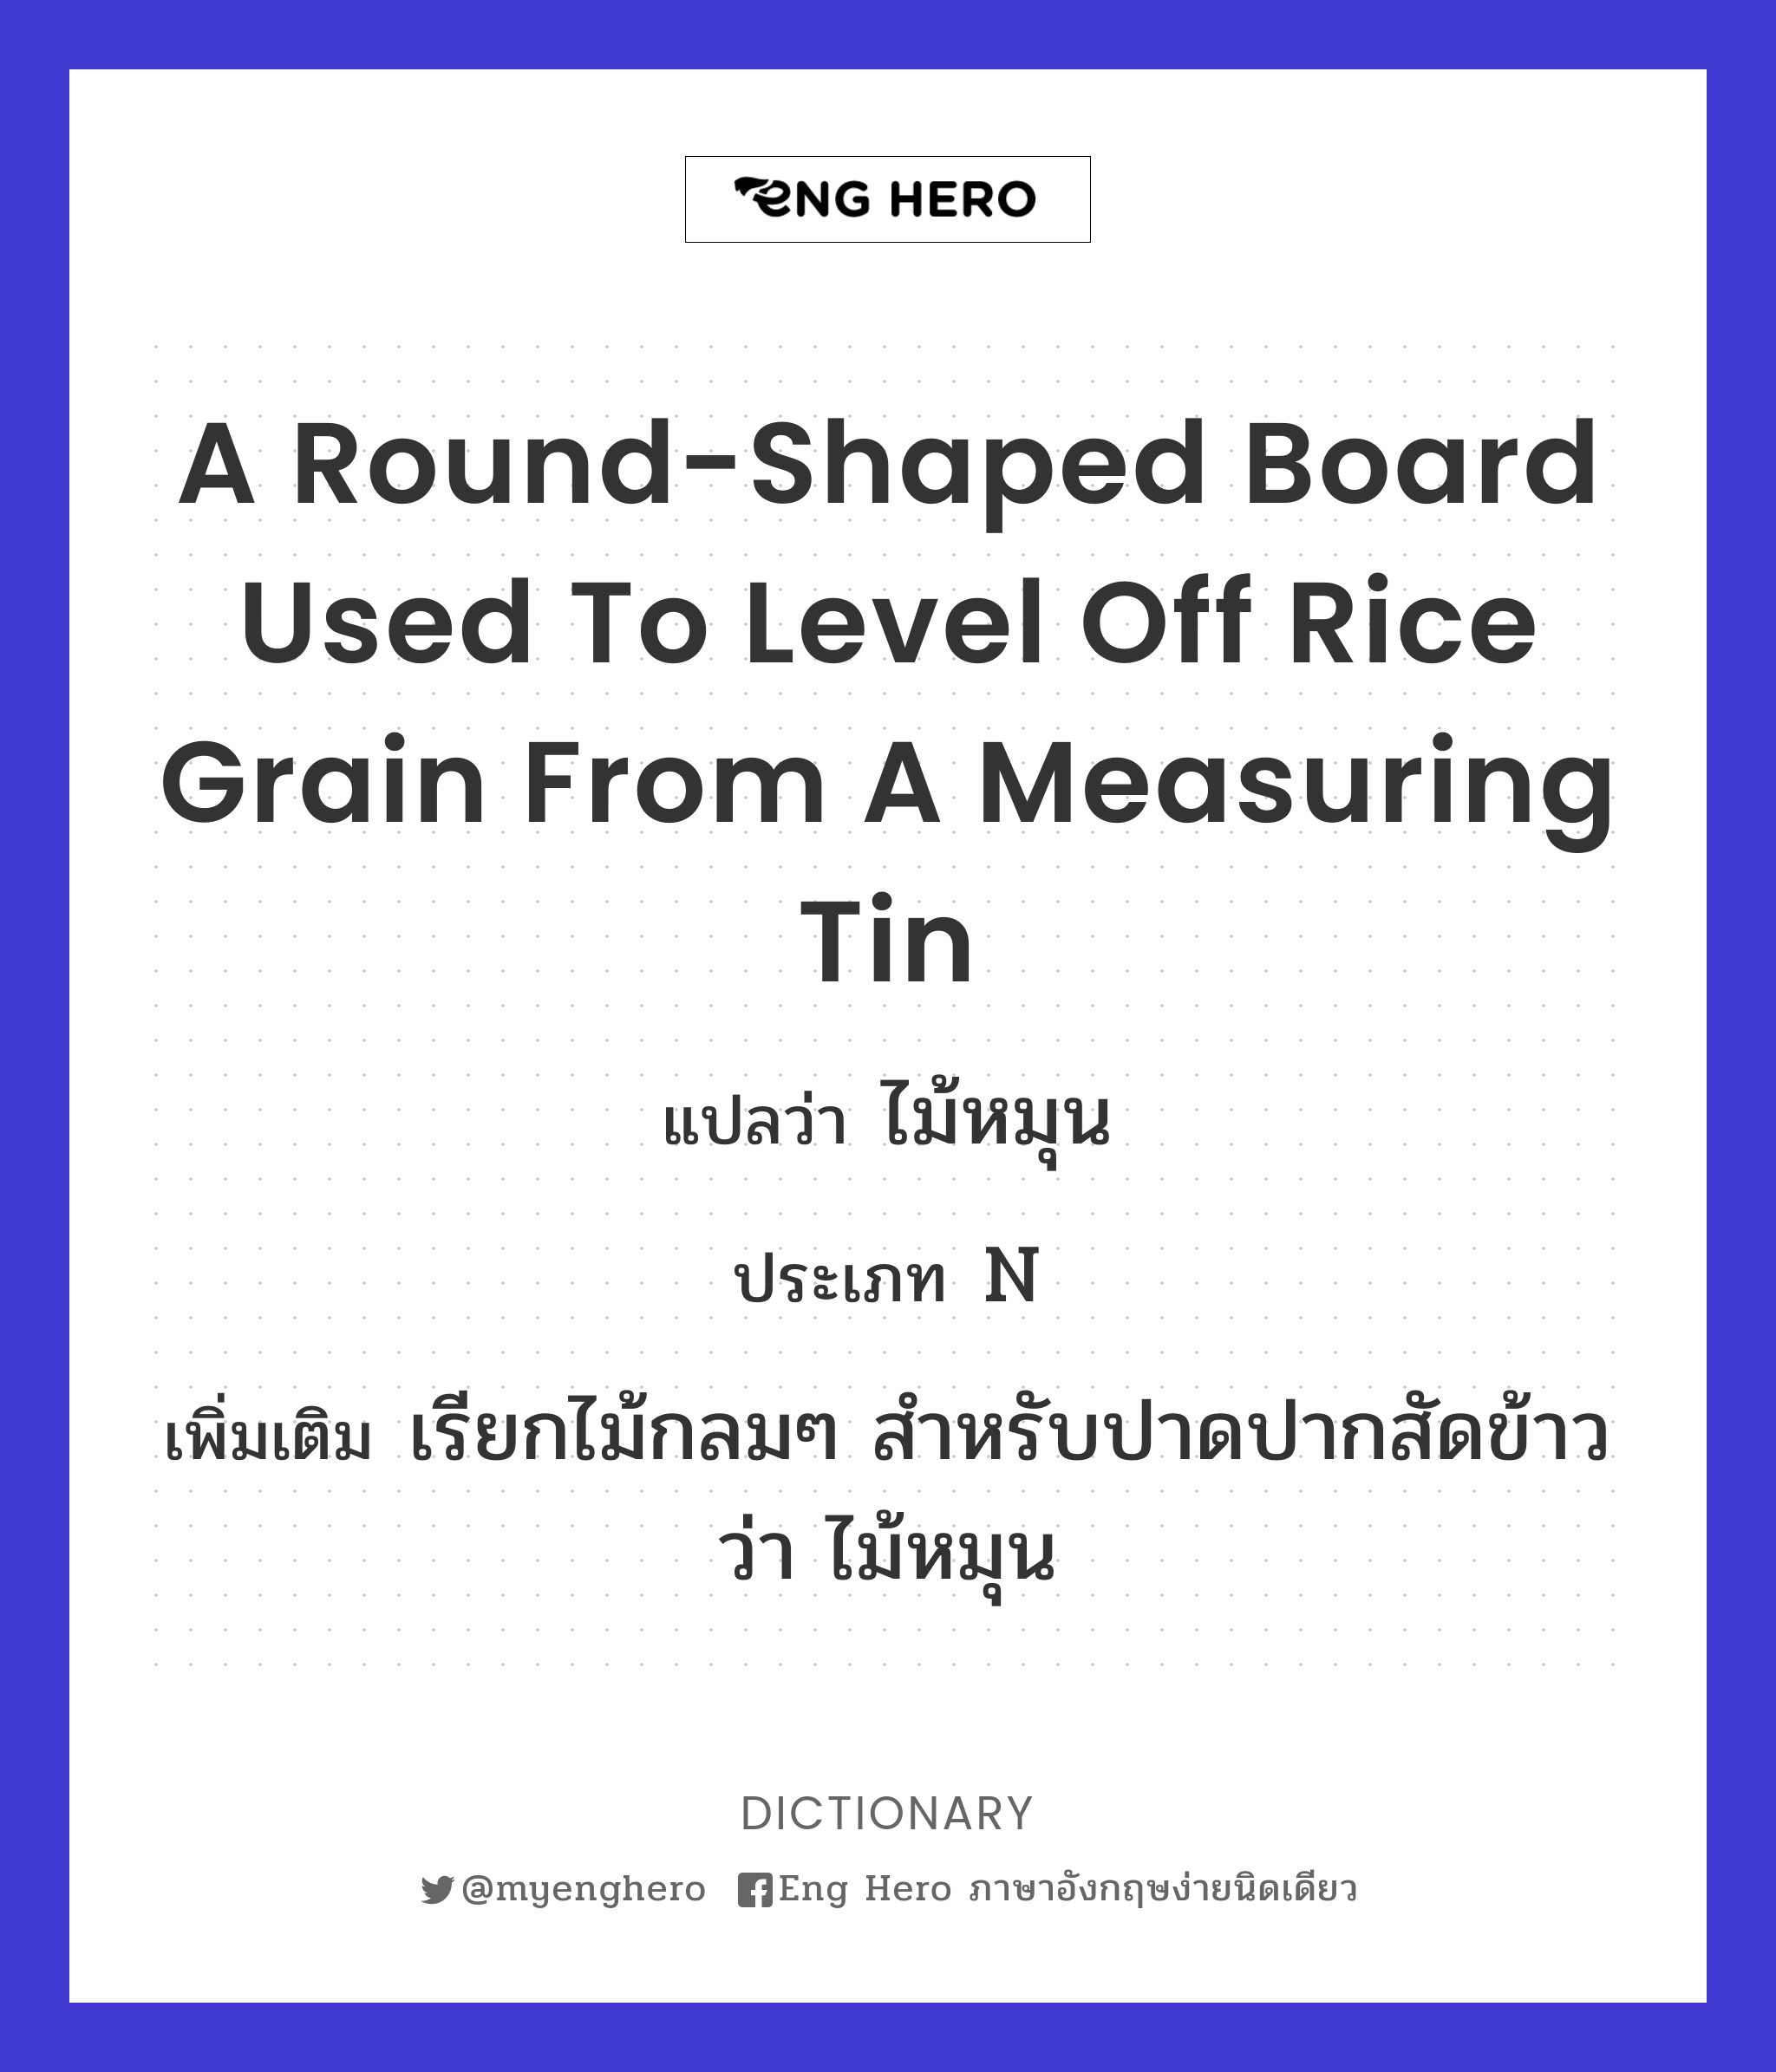 a round-shaped board used to level off rice grain from a measuring tin